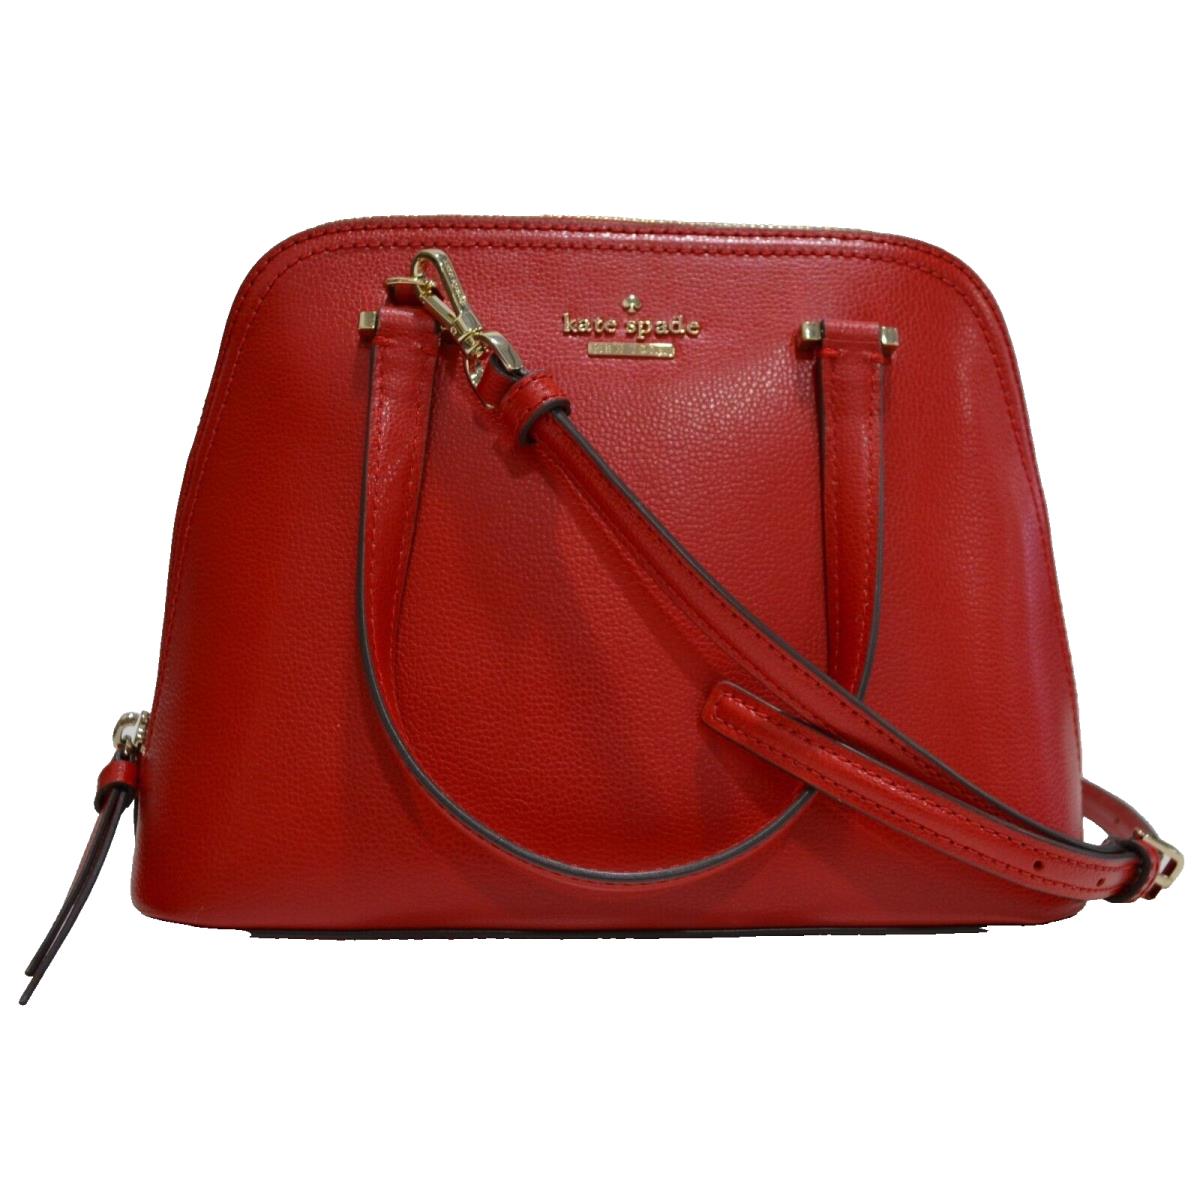 Kate Spade New York Patterson Drive Medium Dome Satchel Crossbody Purse New - Handle/Strap: Red, Exterior: Red, Lining: White